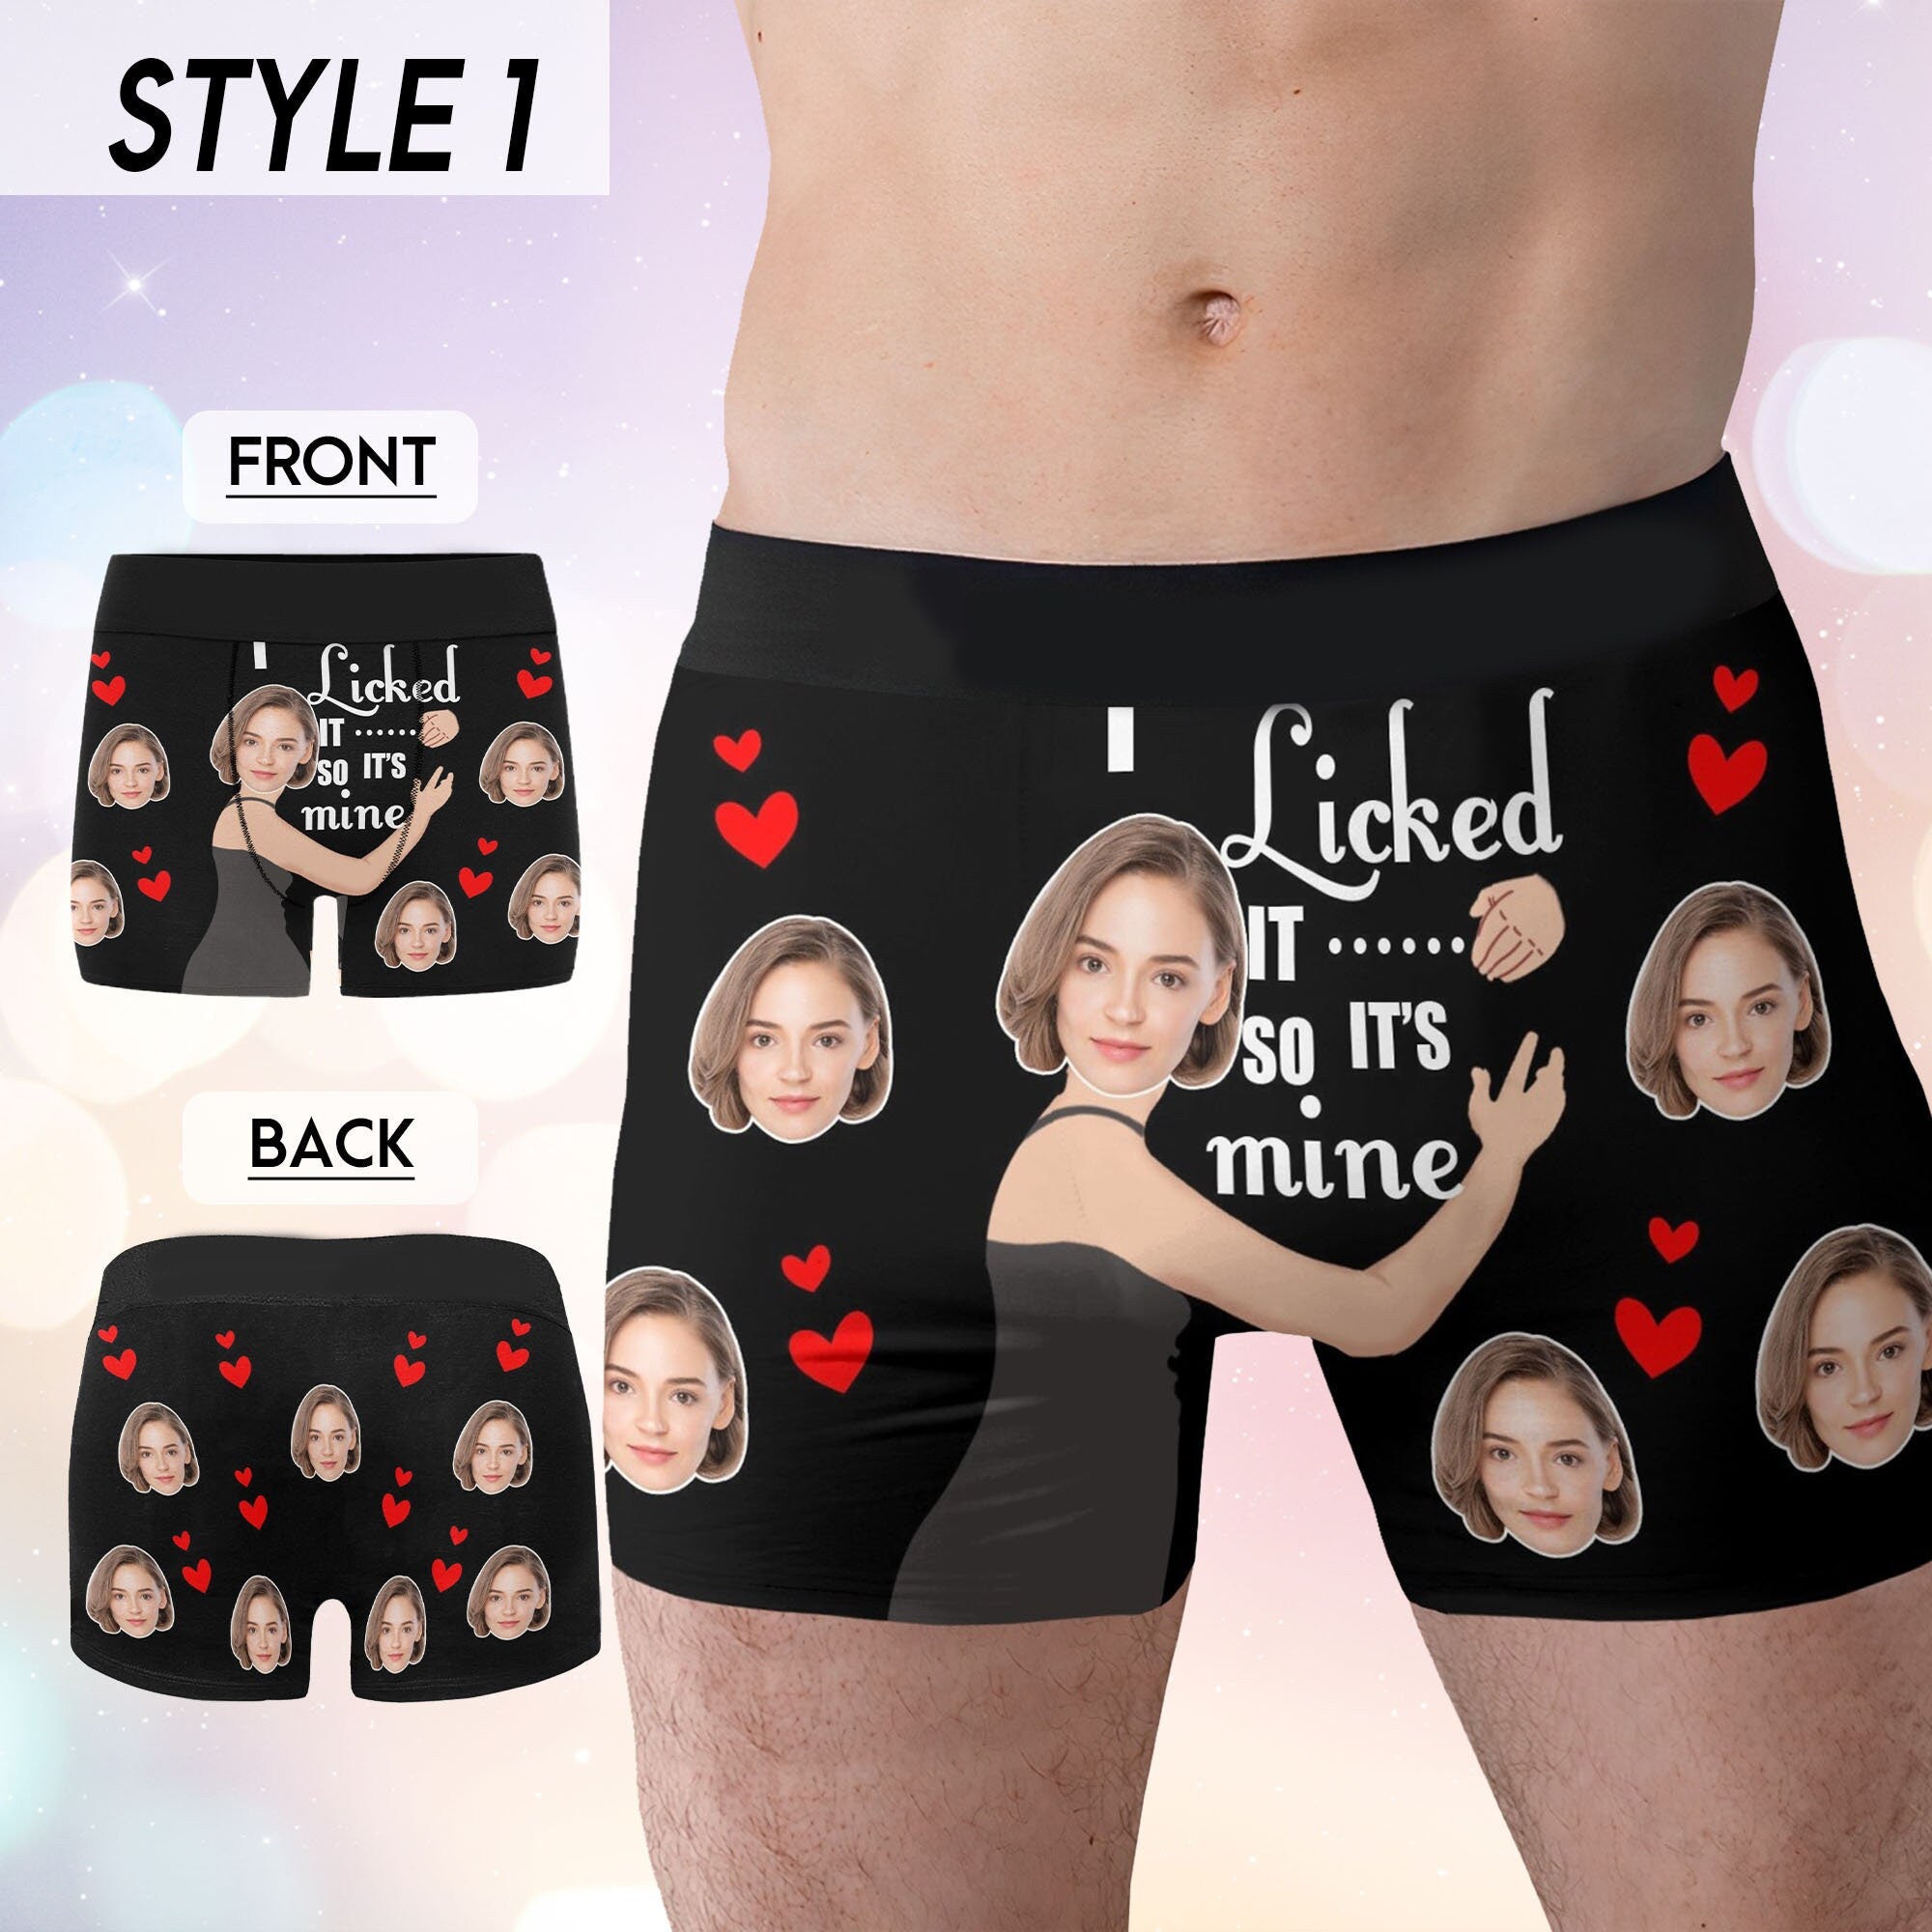 Personalized Comfort: Custom Boxer Briefs for Him